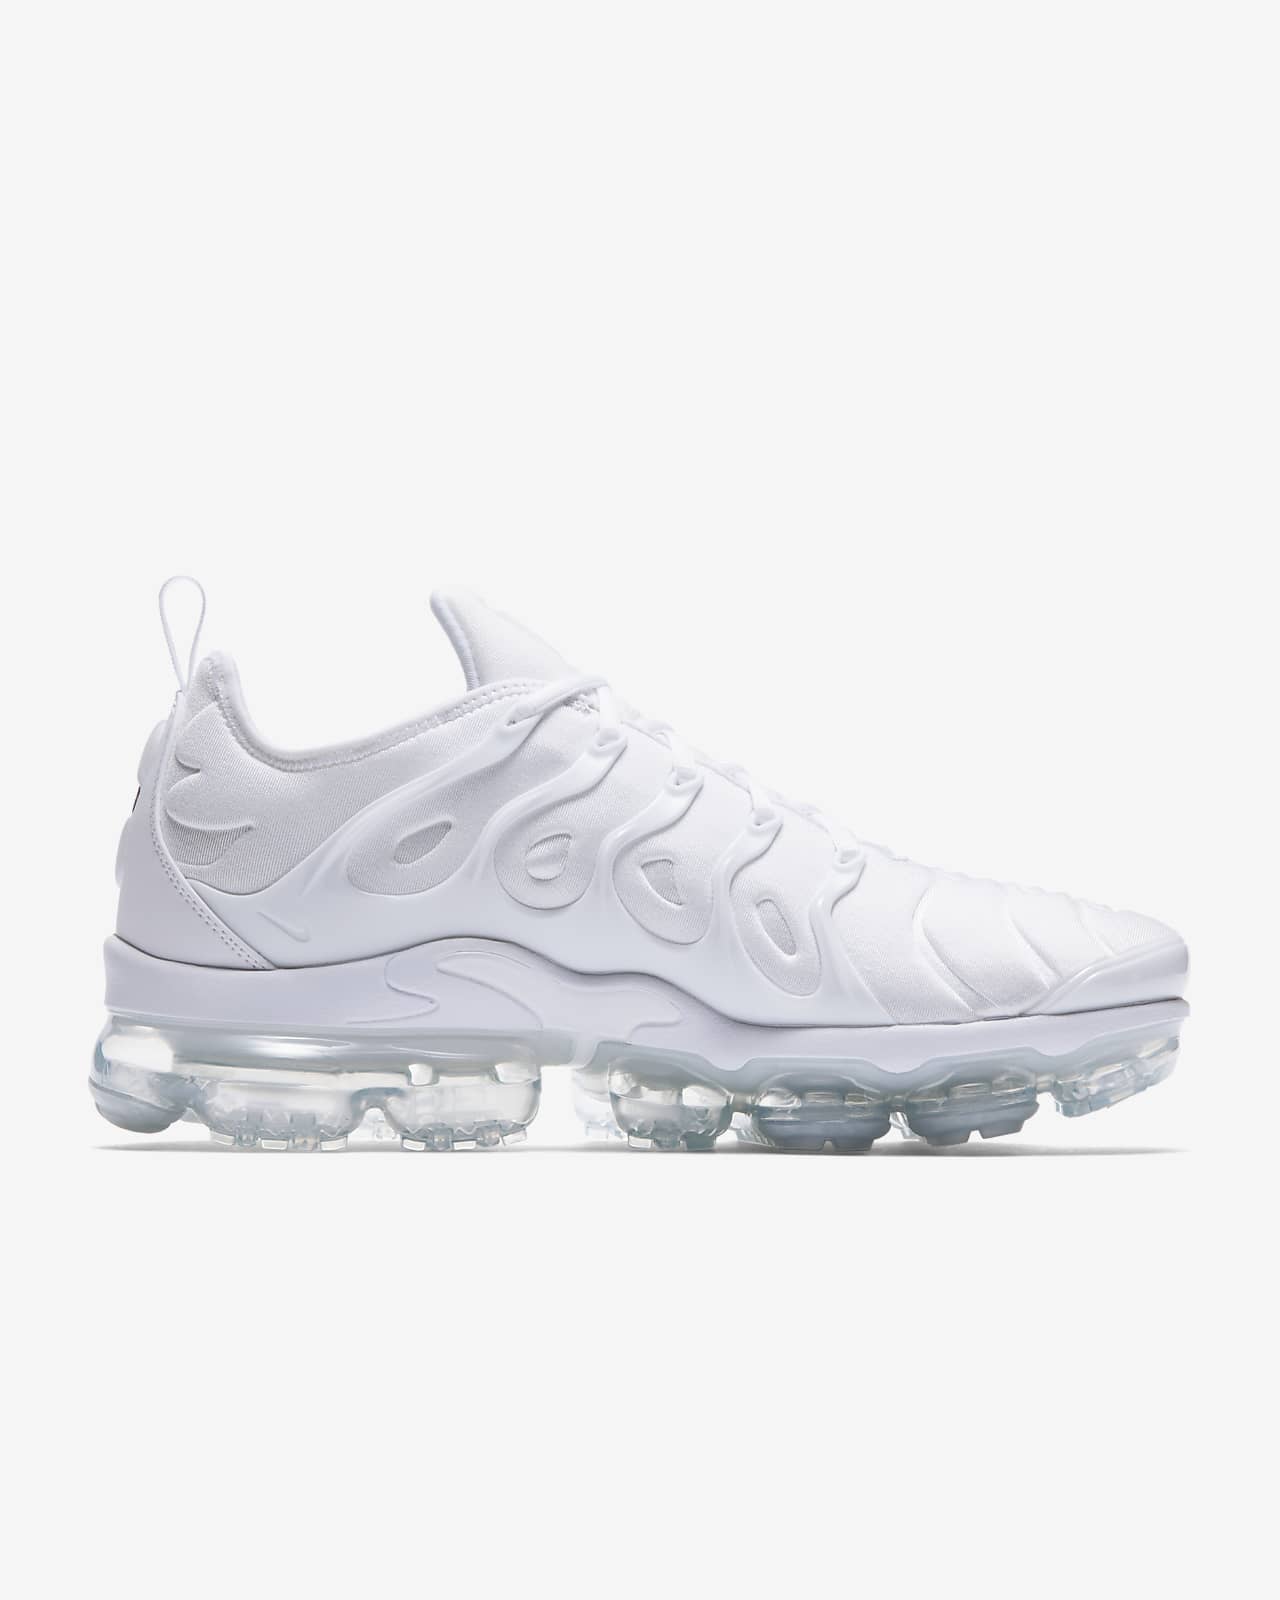 champs shoes nike vapormax- OFF 72 